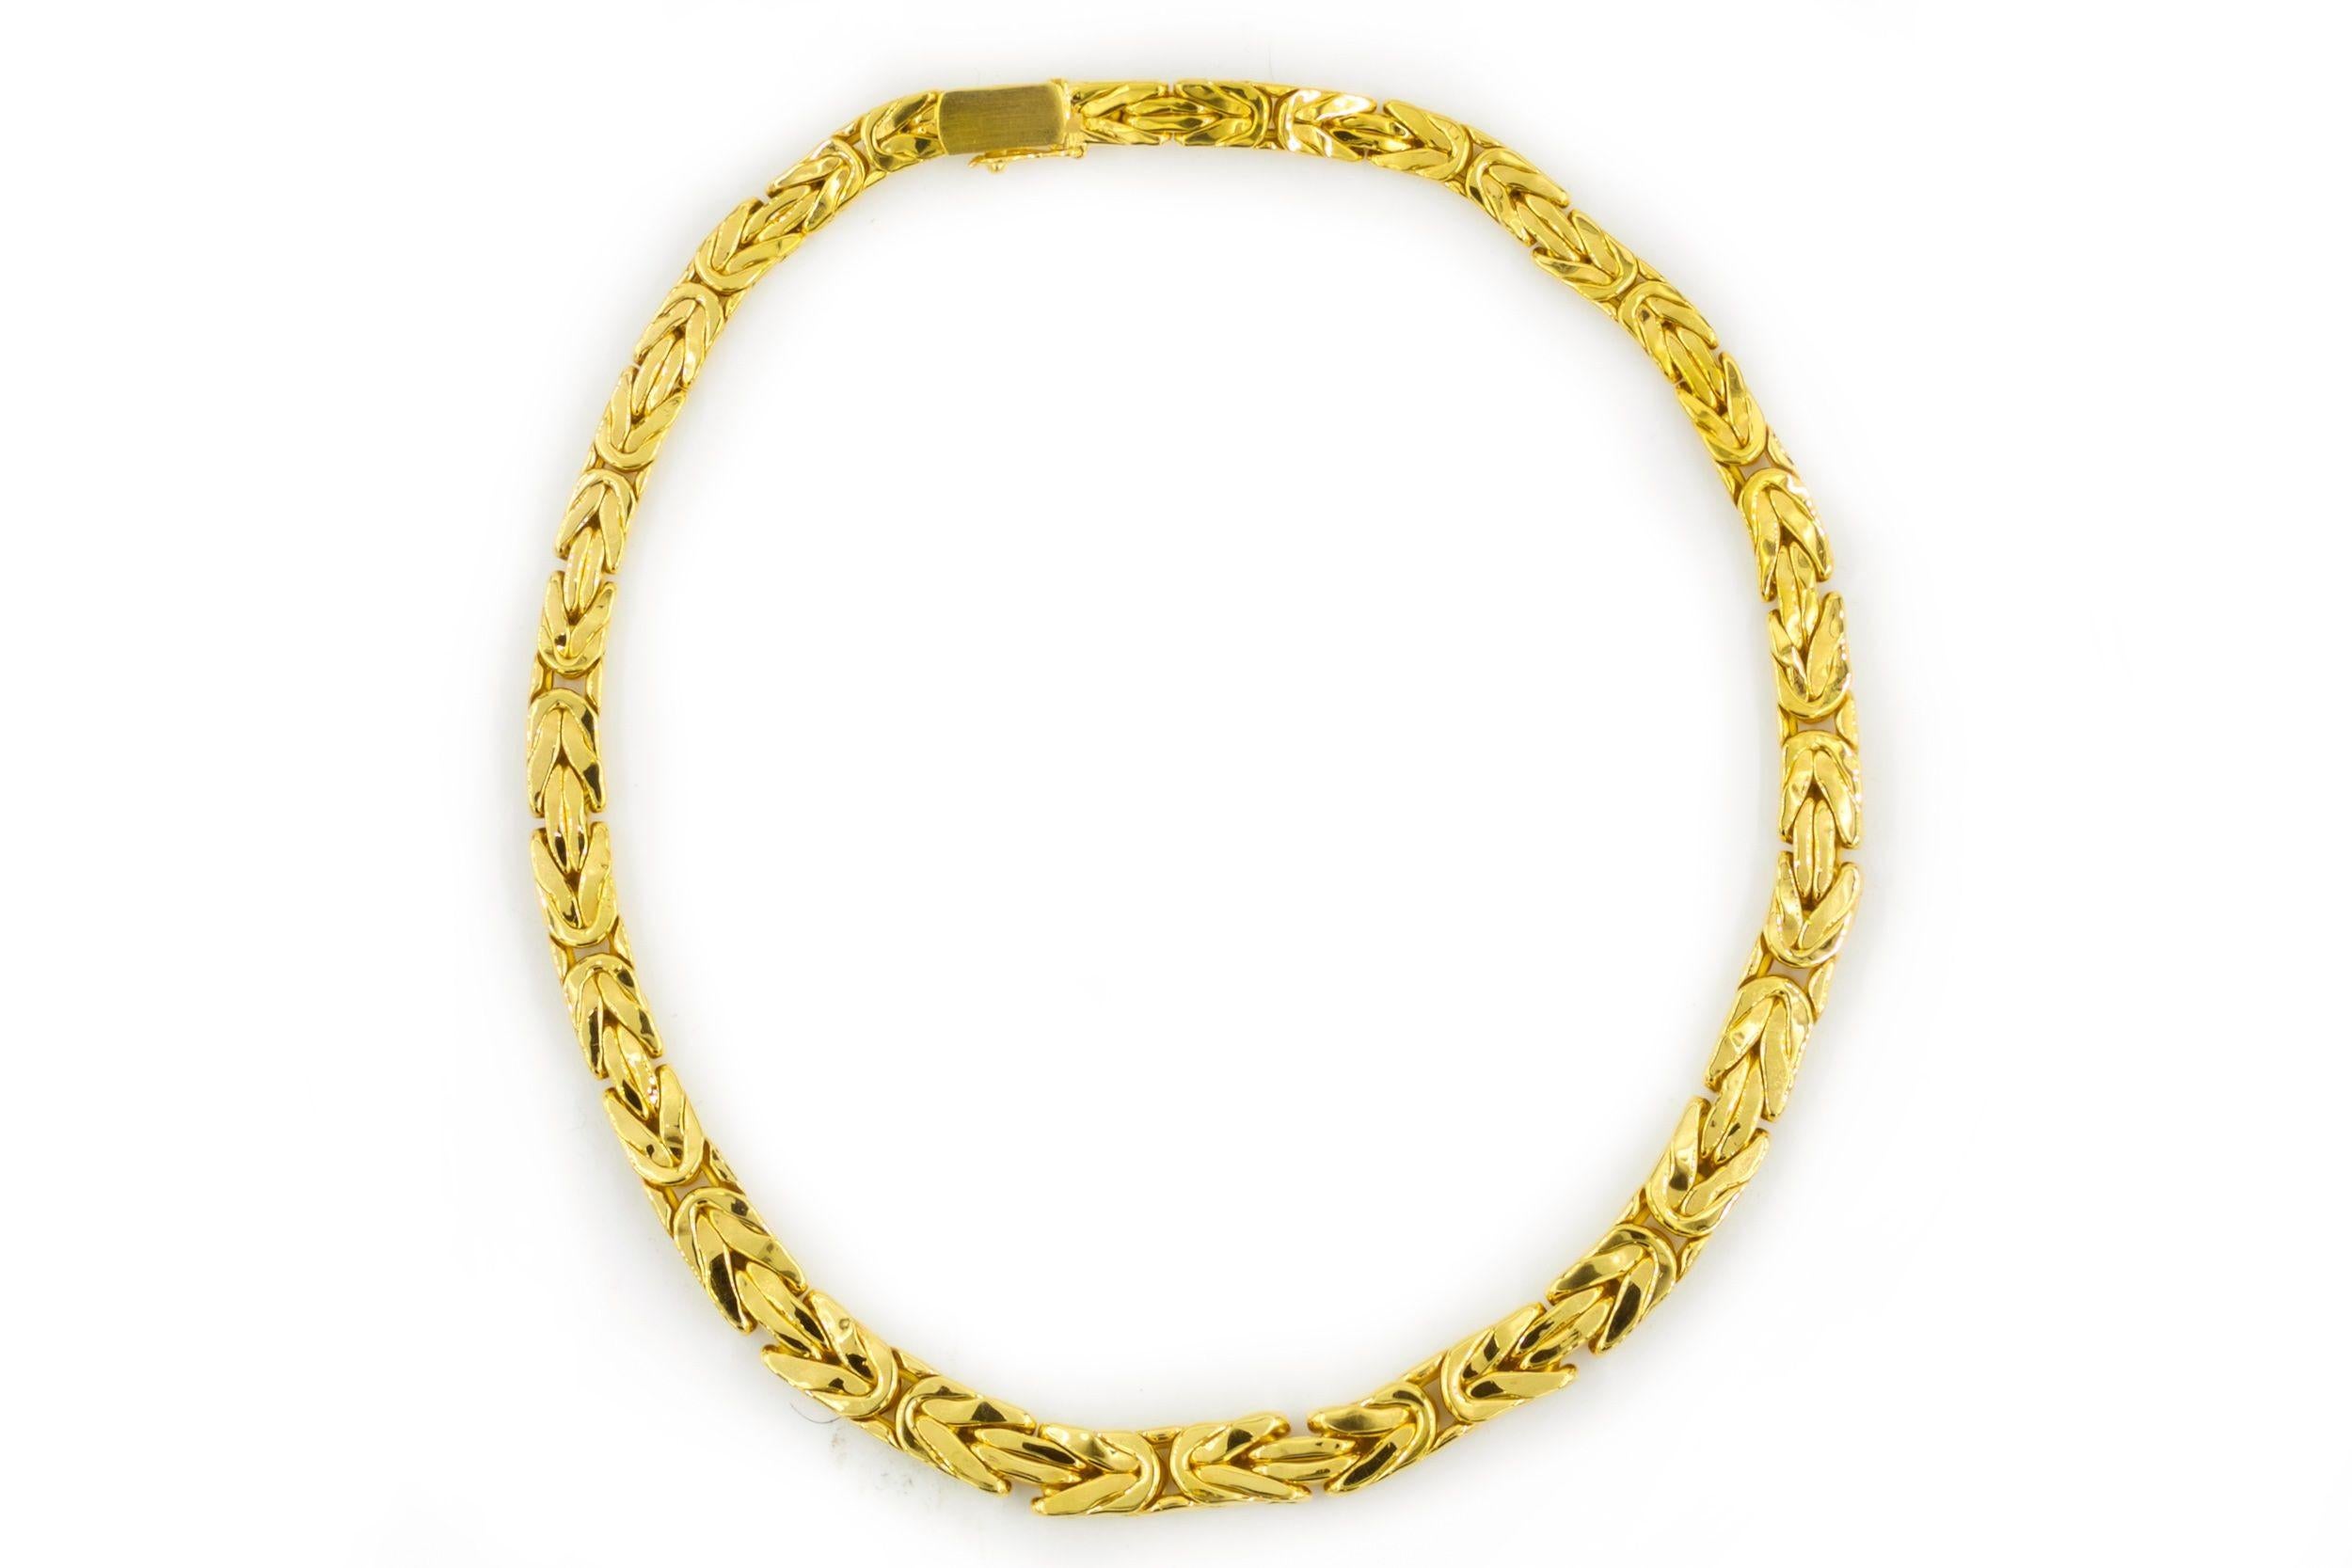 Vintage German 18k Yellow Gold Woven Byzantine Necklace, 15 1/2